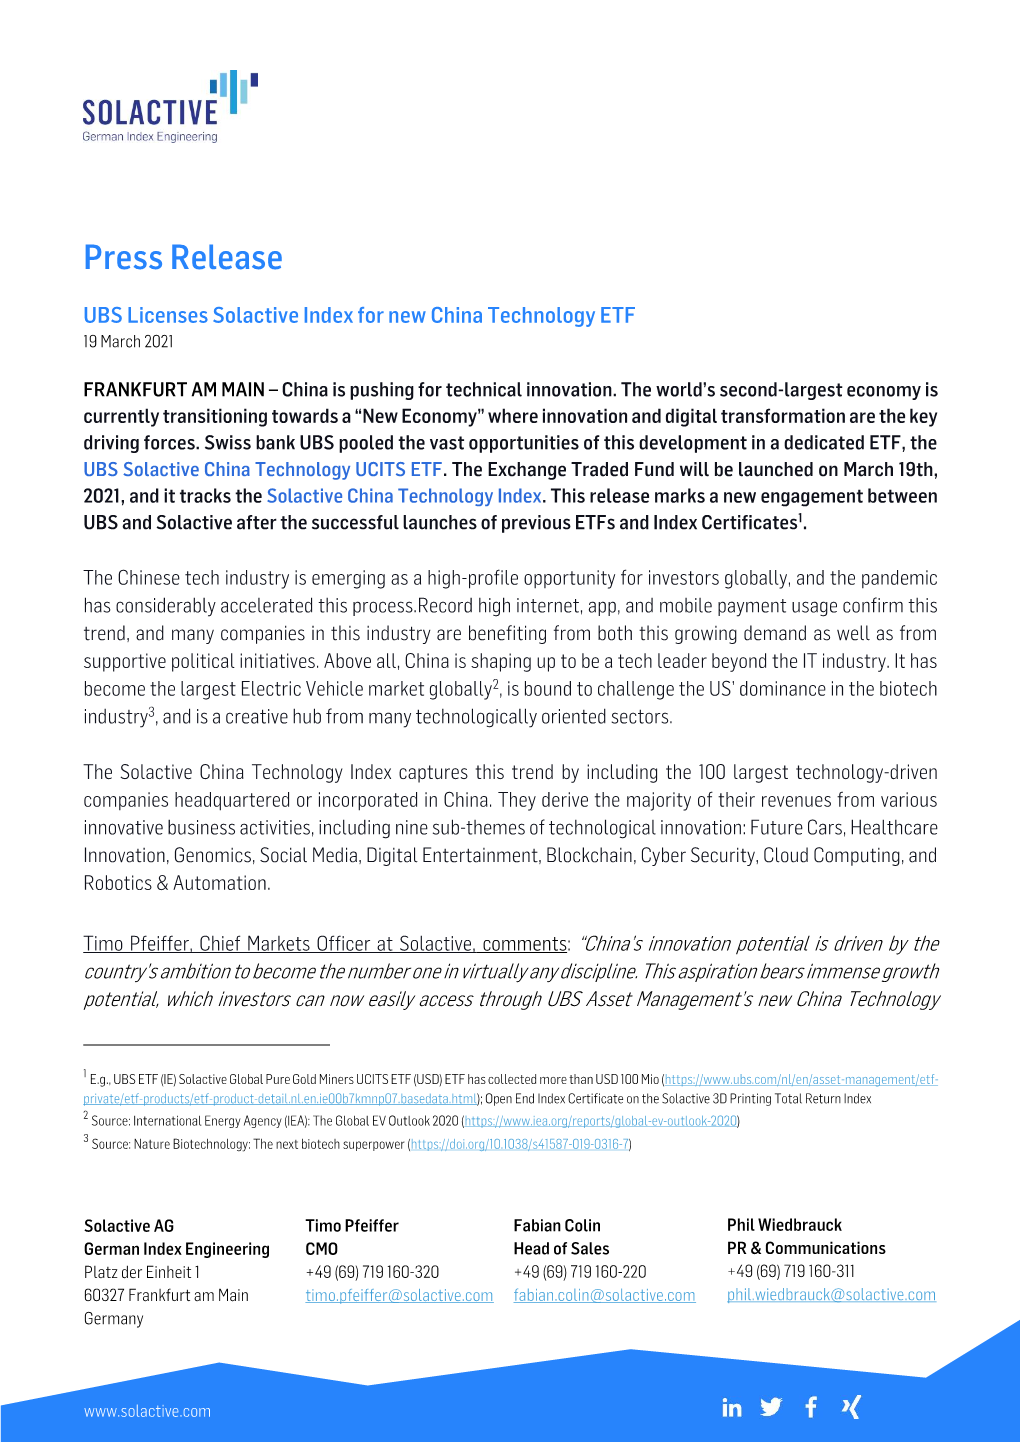 Press Release – UBS Licenses Solactive Index for New China